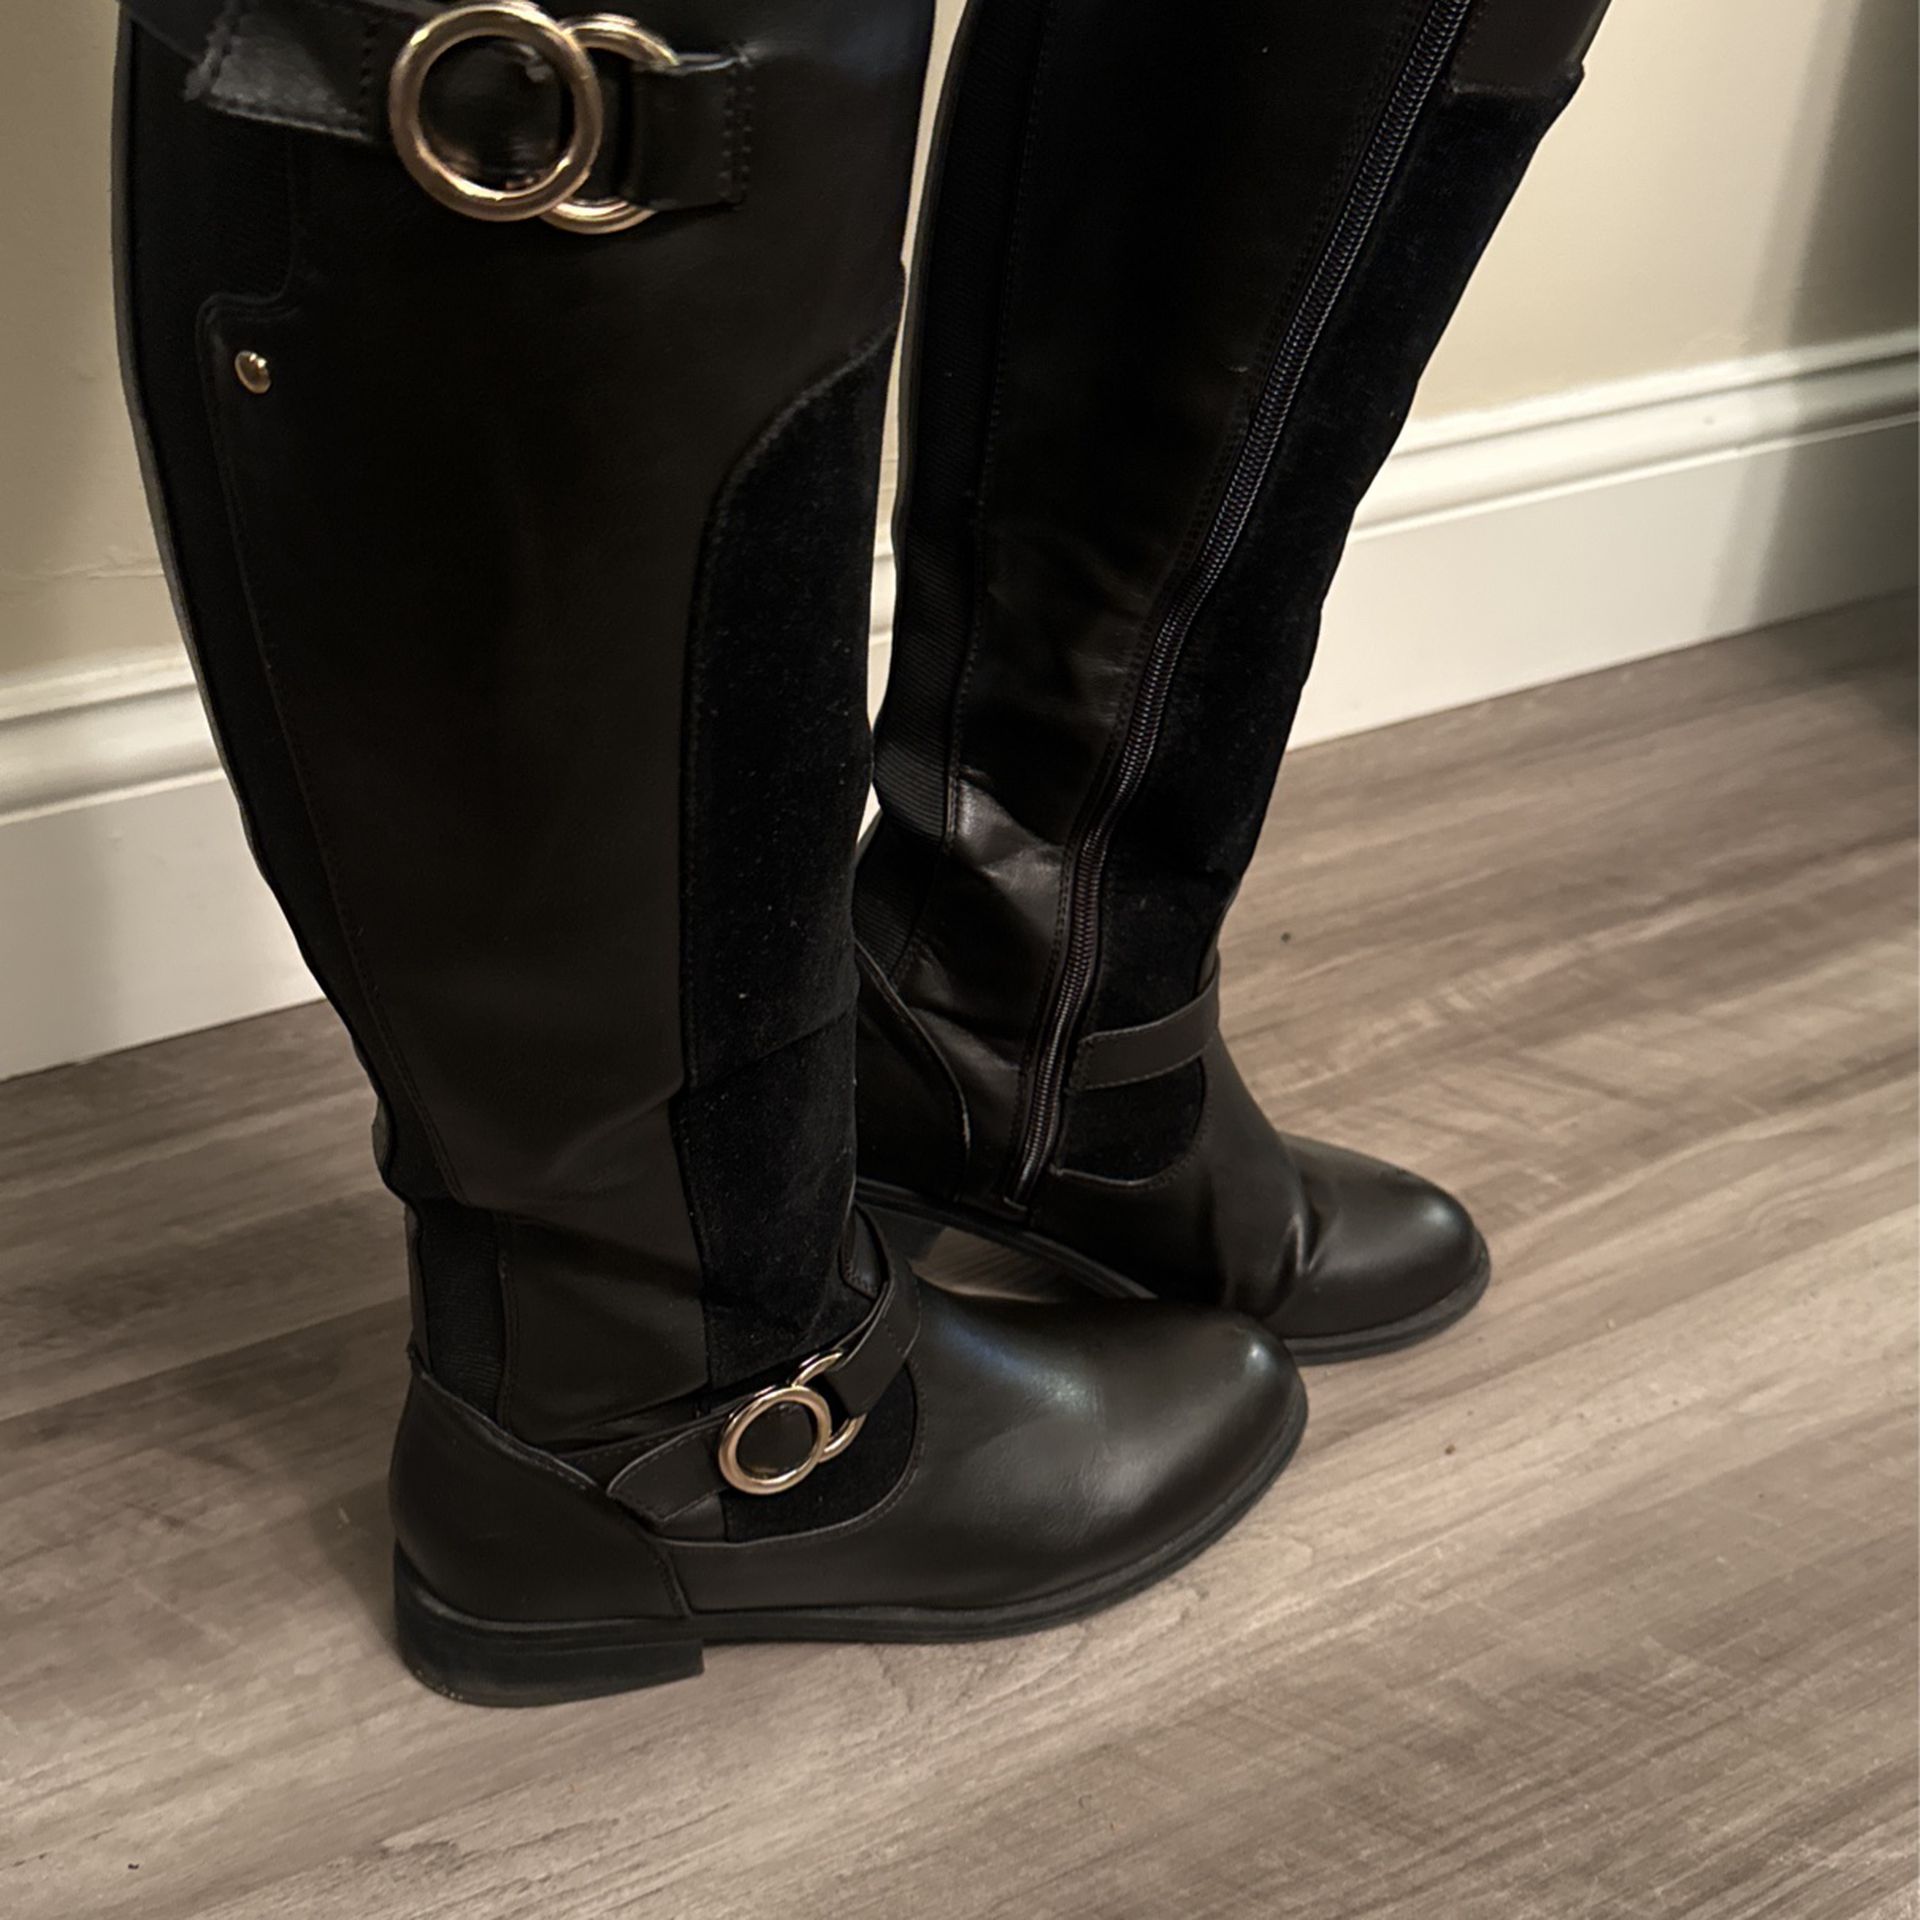 Women’s Boots - Mid-calf - Size 7.5